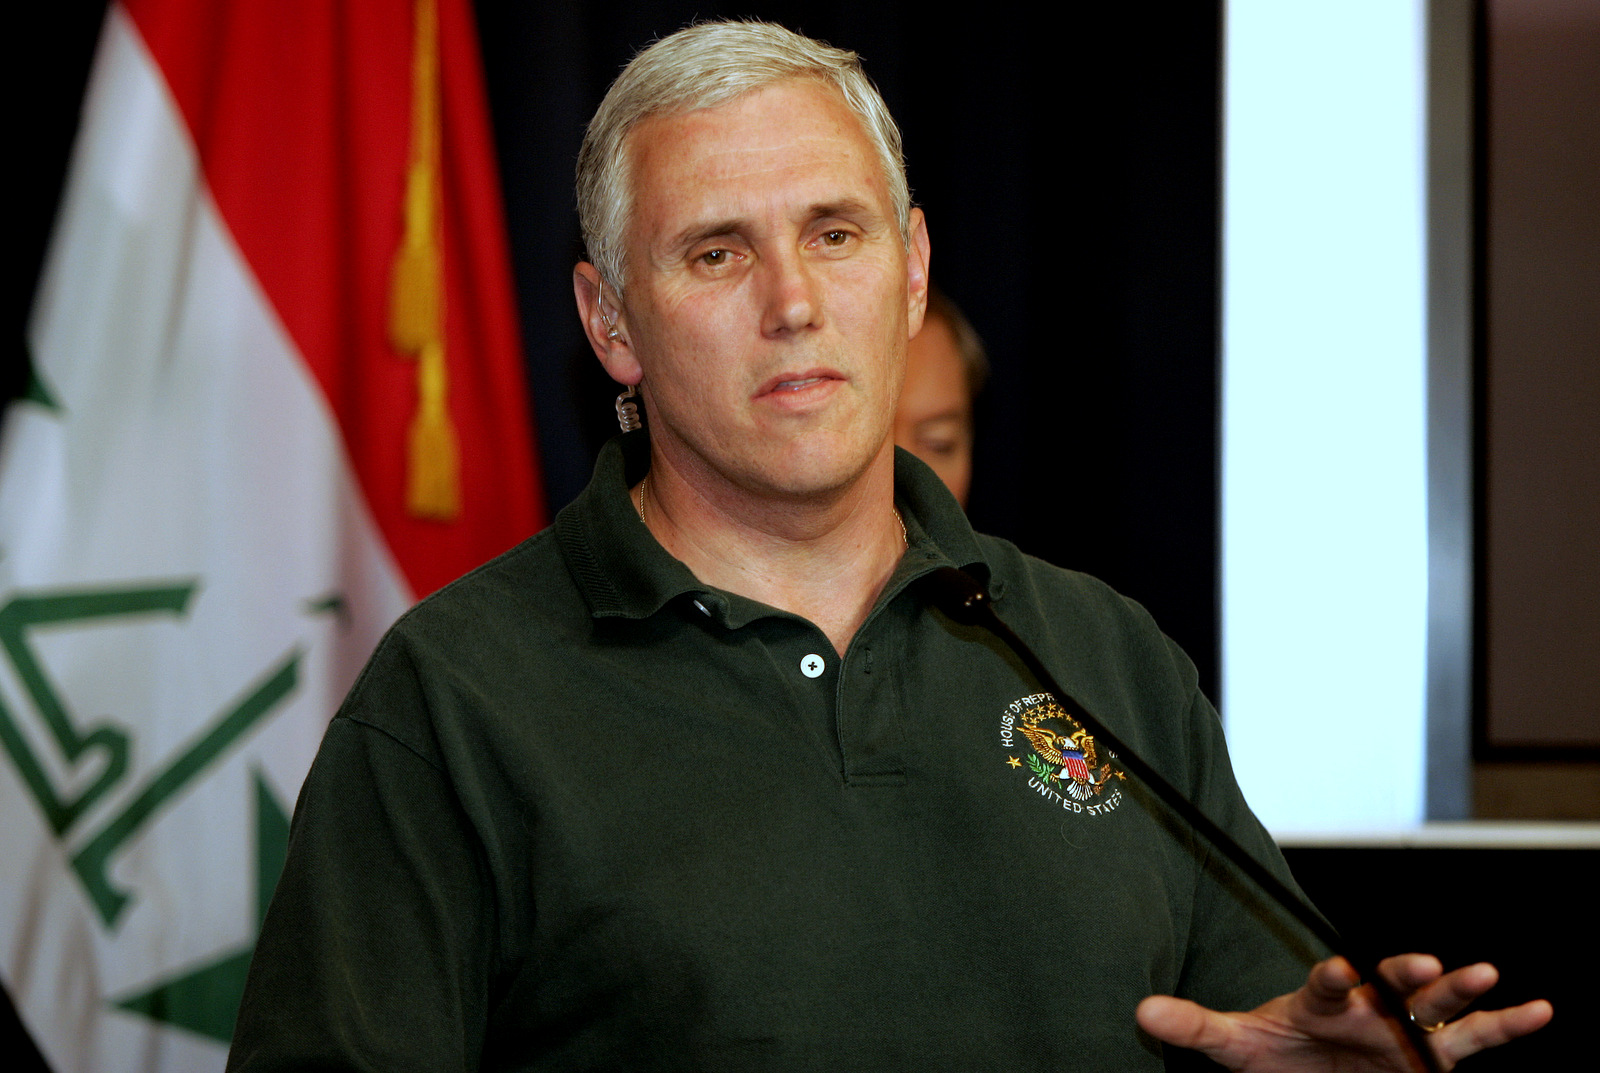 Mike Pence, speaks during a press conference at the heavily fortified Green Zone in Baghdad, to battle Democratic efforts to impose a deadline for withdrawal of U.S. troops from Iraq, April 1, 2007. (AP Photo/Sabah Arar)